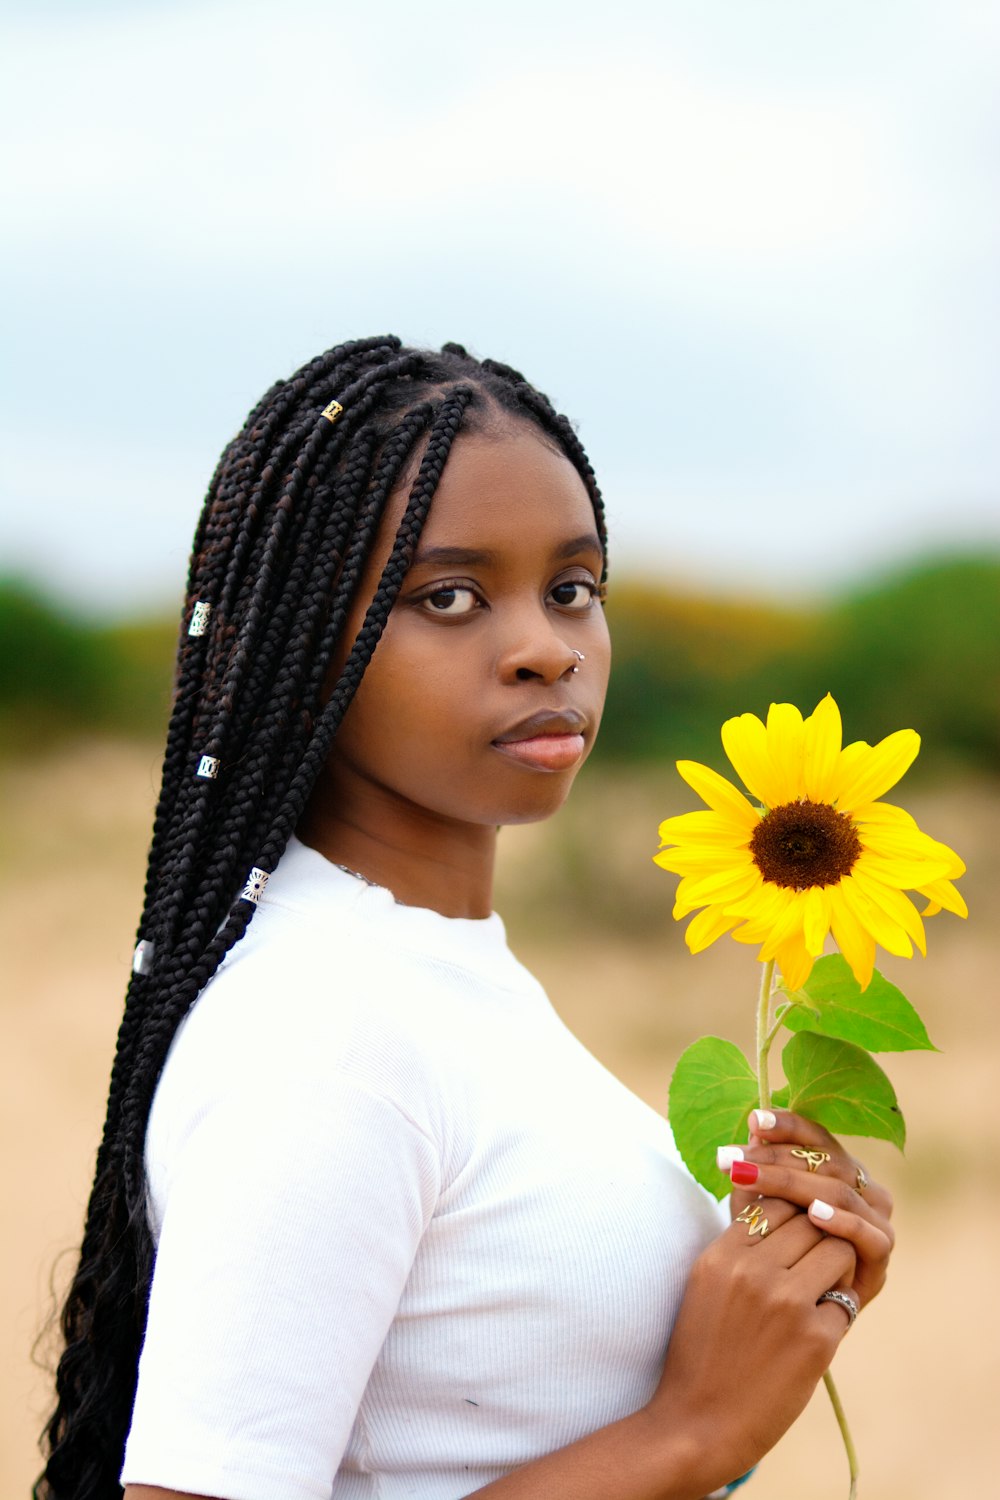 woman in white shirt holding yellow sunflower during daytime